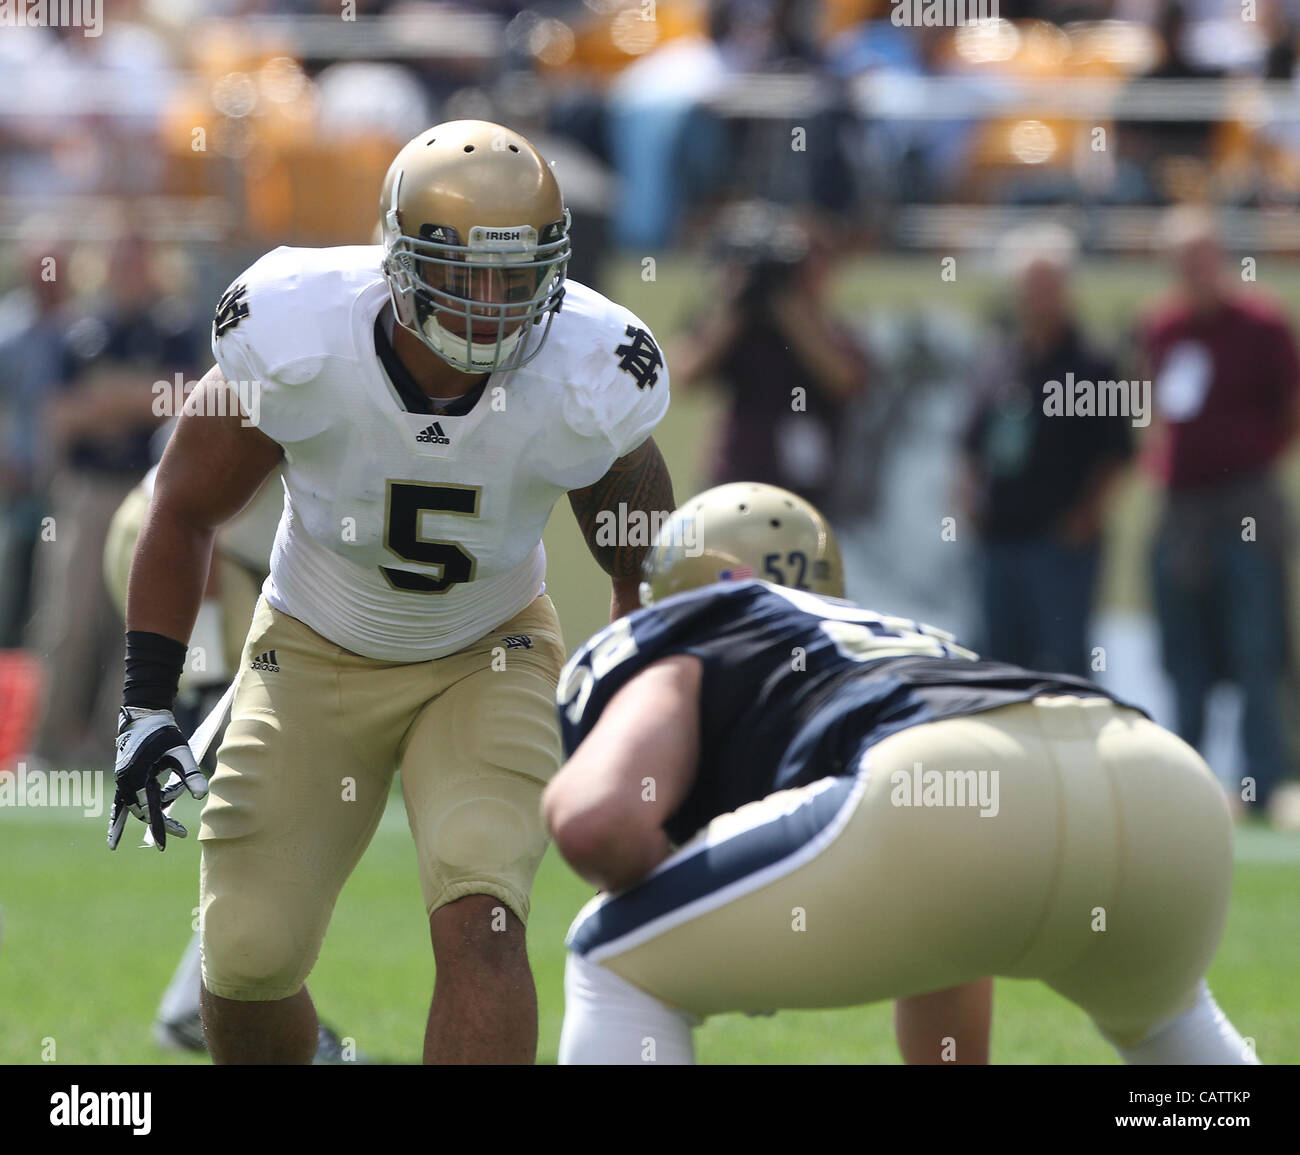 Sept. 23, 2011 - Pittsburgh, Pennsylvania, USA - Notre Dame Fighting Irish linebacker Manti Te'o (5). The Notre Dame Fighting Irish were able to hold onto a slight lead to beat the University of Pittsburgh Panthers in Hienz Field.  Photo By Aaron Suozzi (Credit Image: © Aaron Souzzi/ZUMAPRESS.com) Stock Photo